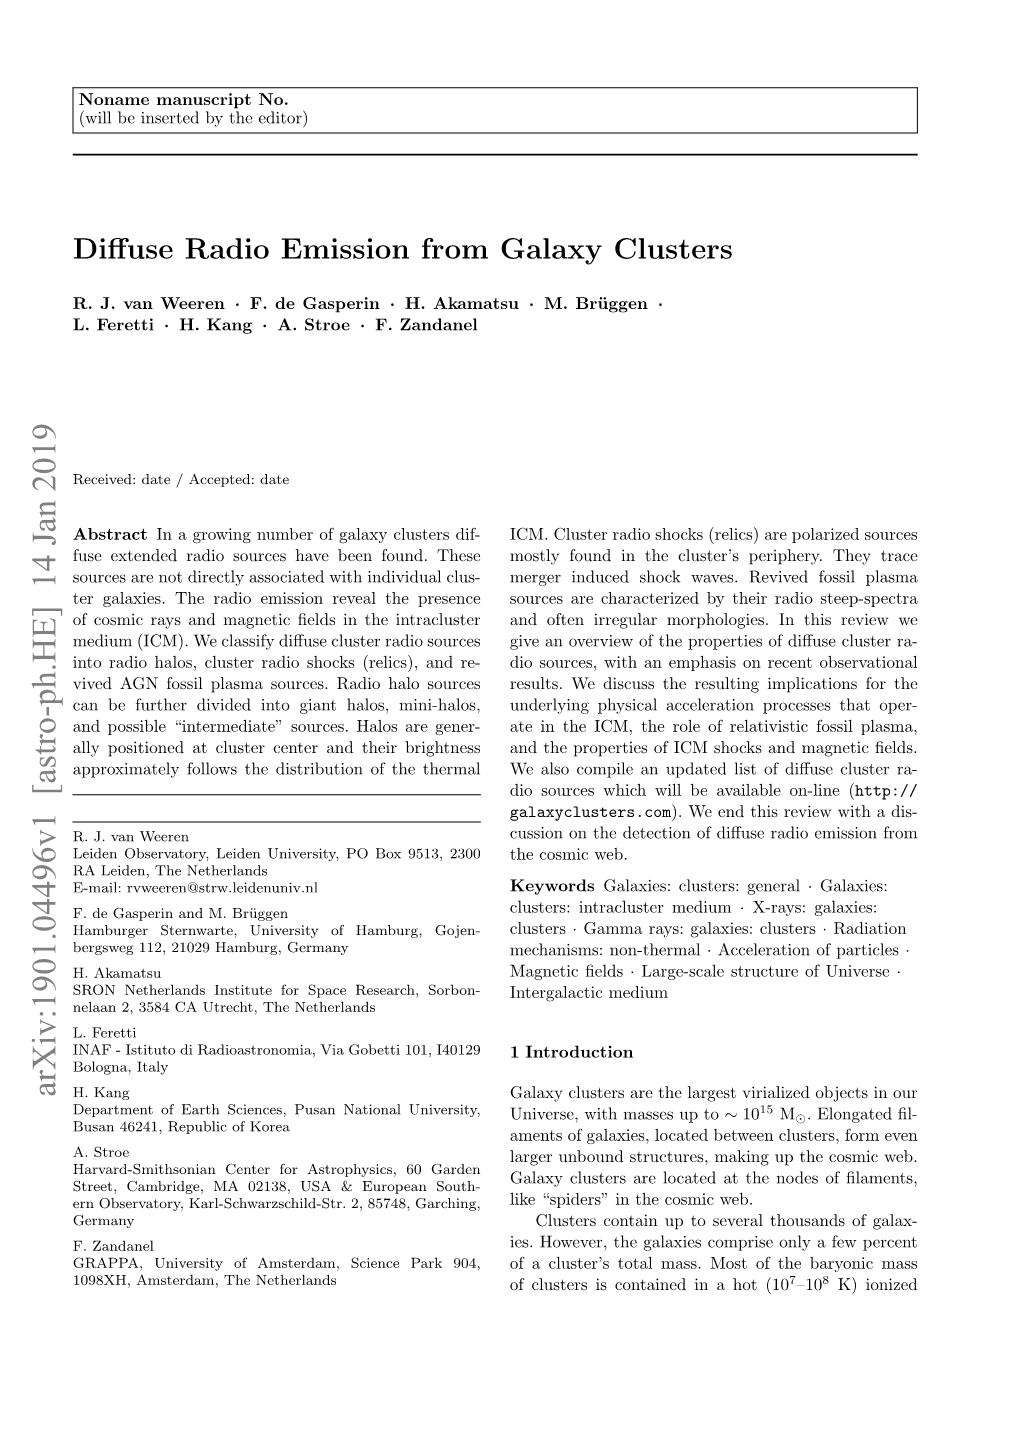 Diffuse Radio Emission from Galaxy Clusters